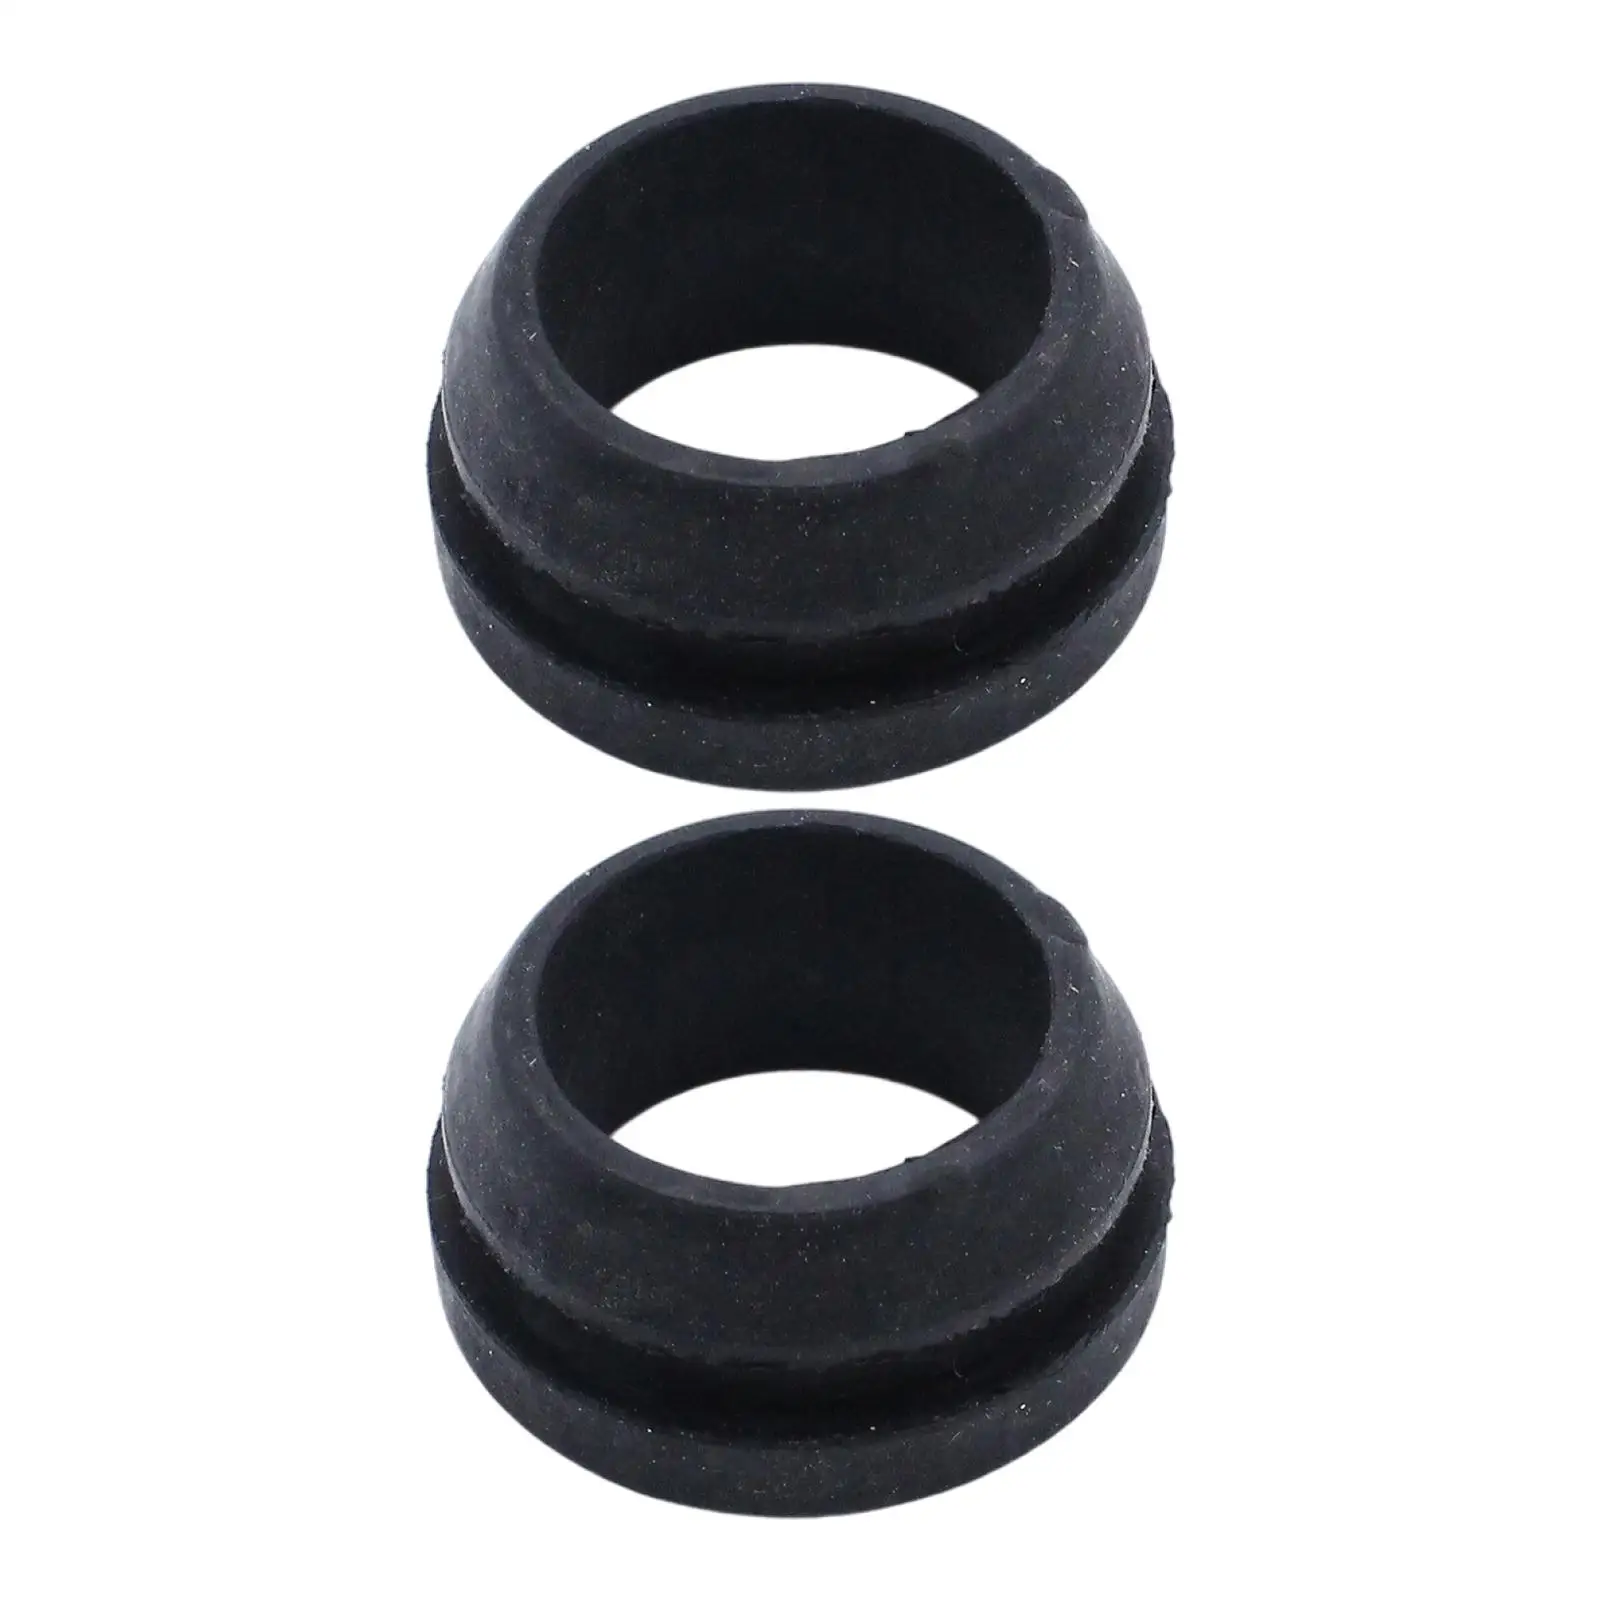 2Pcs High Temp Rubber Breather Pcv Grommets Fit for Metal Valve Cover 4880 4998